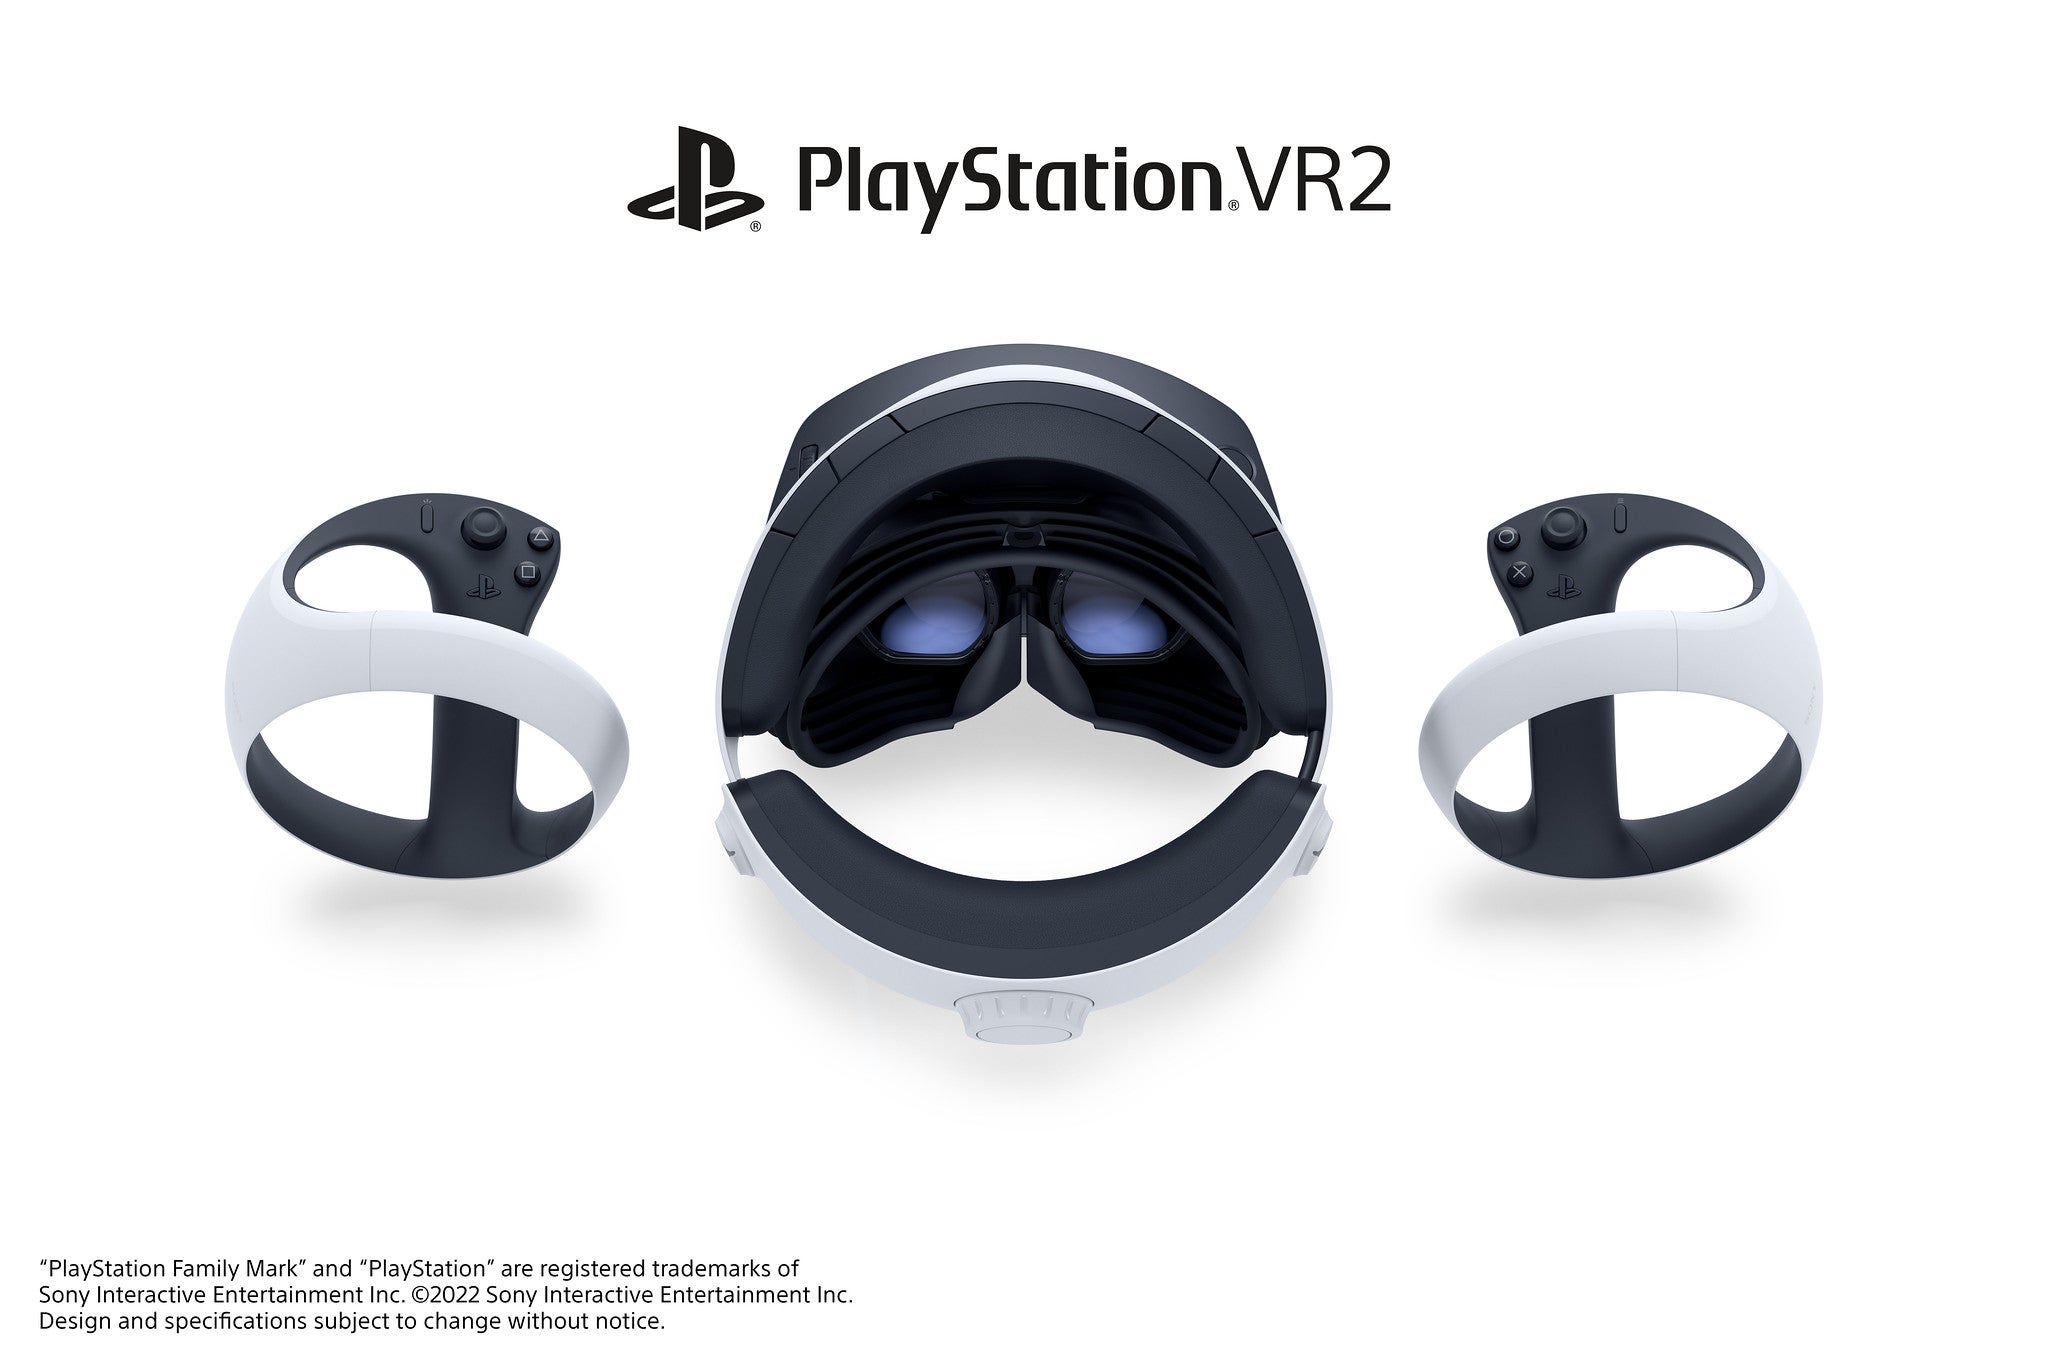 psvr-2-release-confirmed-for-early-2023